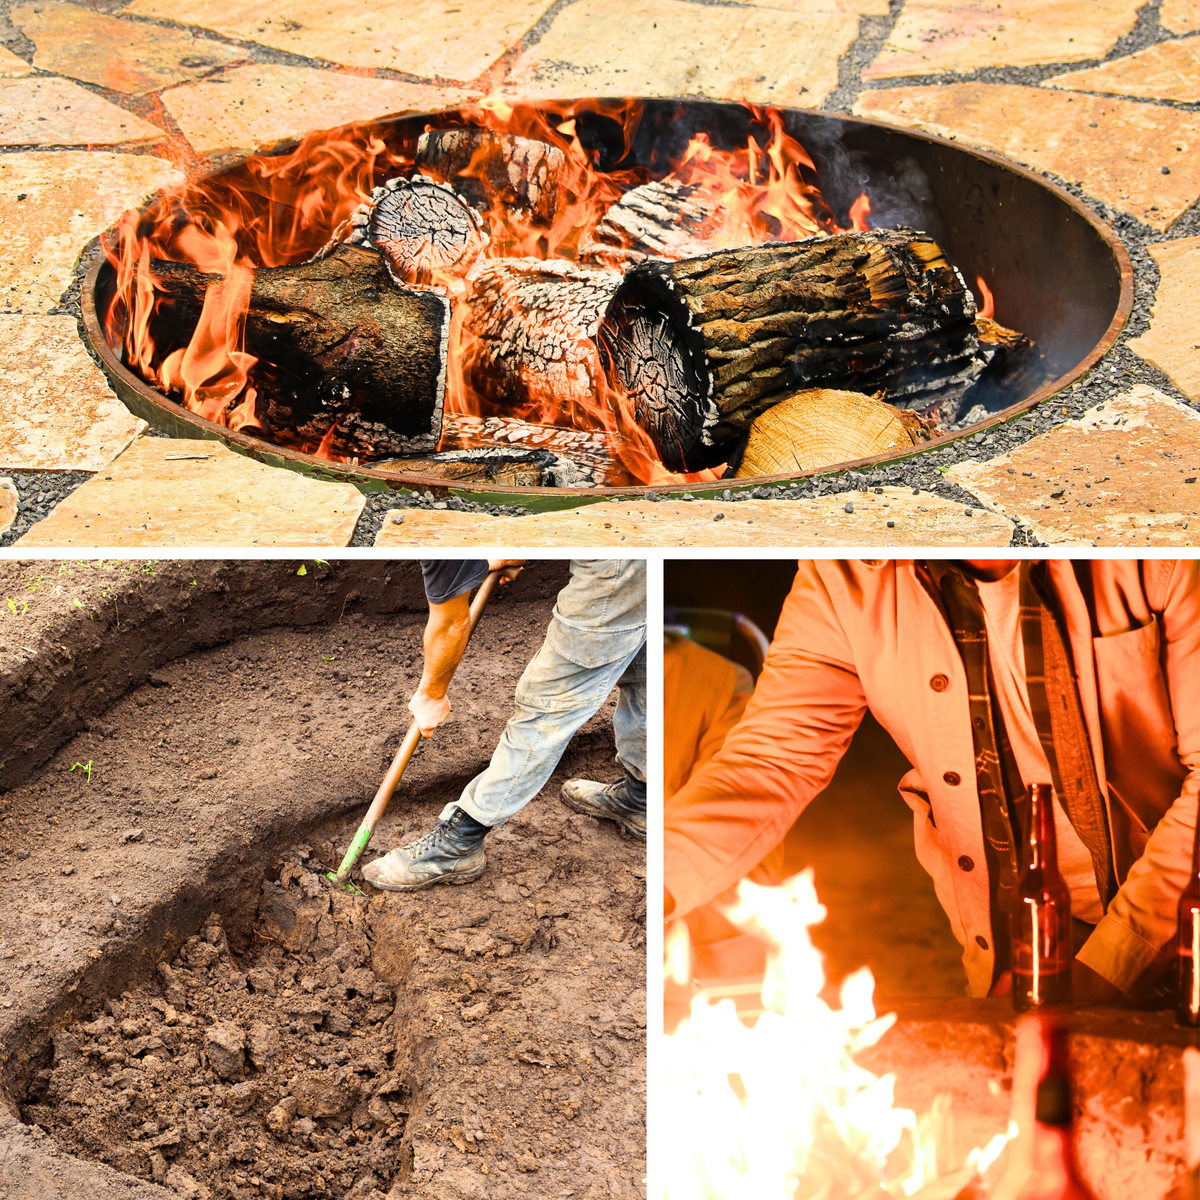 Digging hole for a fire pit, sunken fire pit with burning wood, man enjoying fire pit